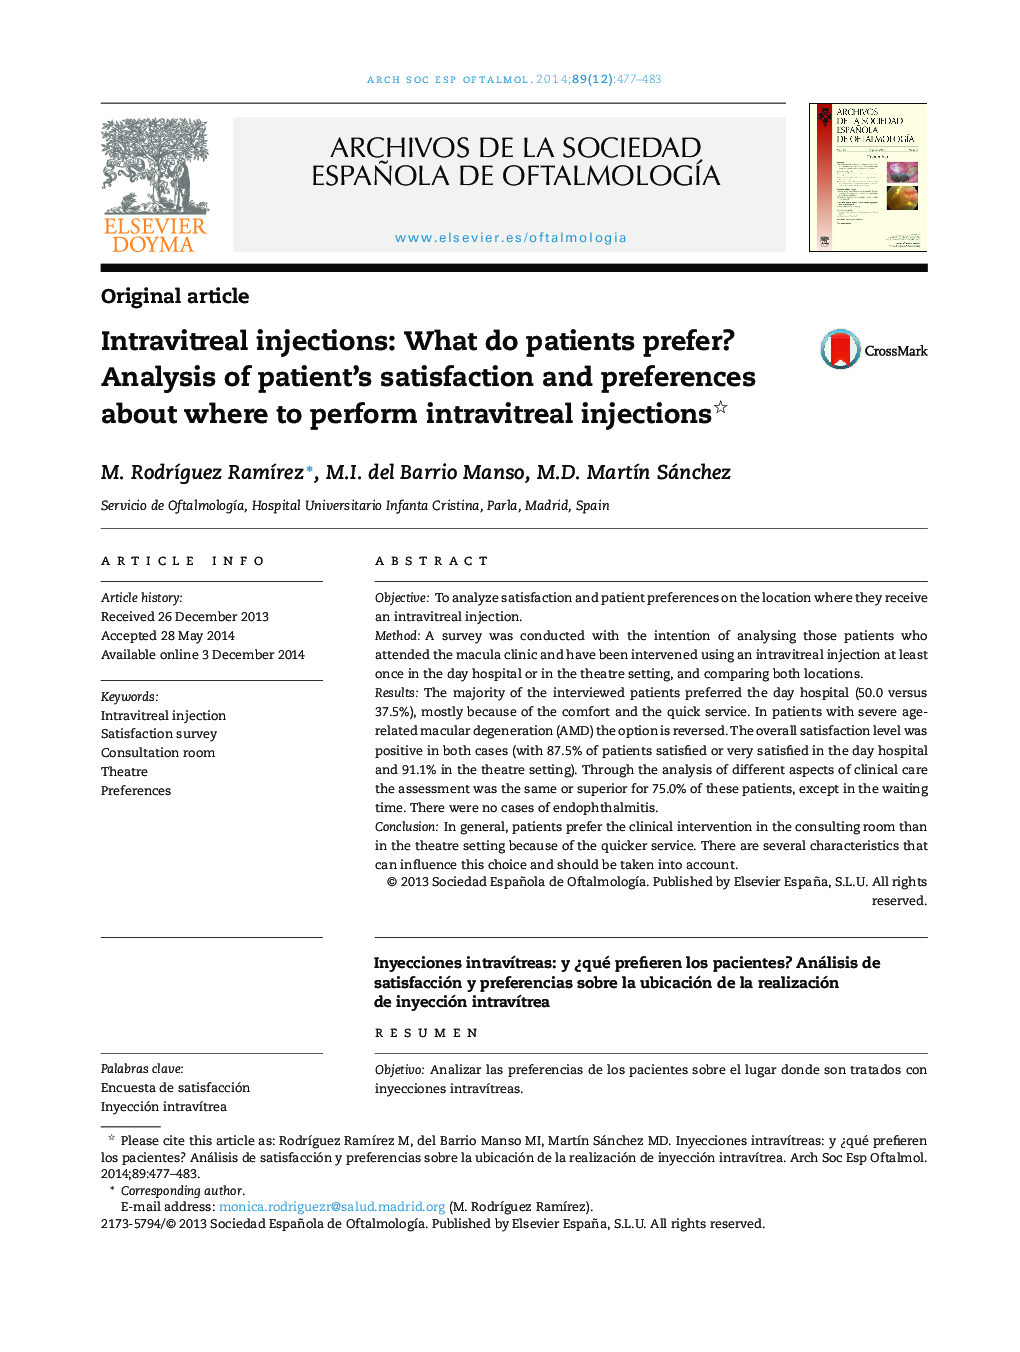 Intravitreal injections: What do patients prefer? Analysis of patient's satisfaction and preferences about where to perform intravitreal injections 